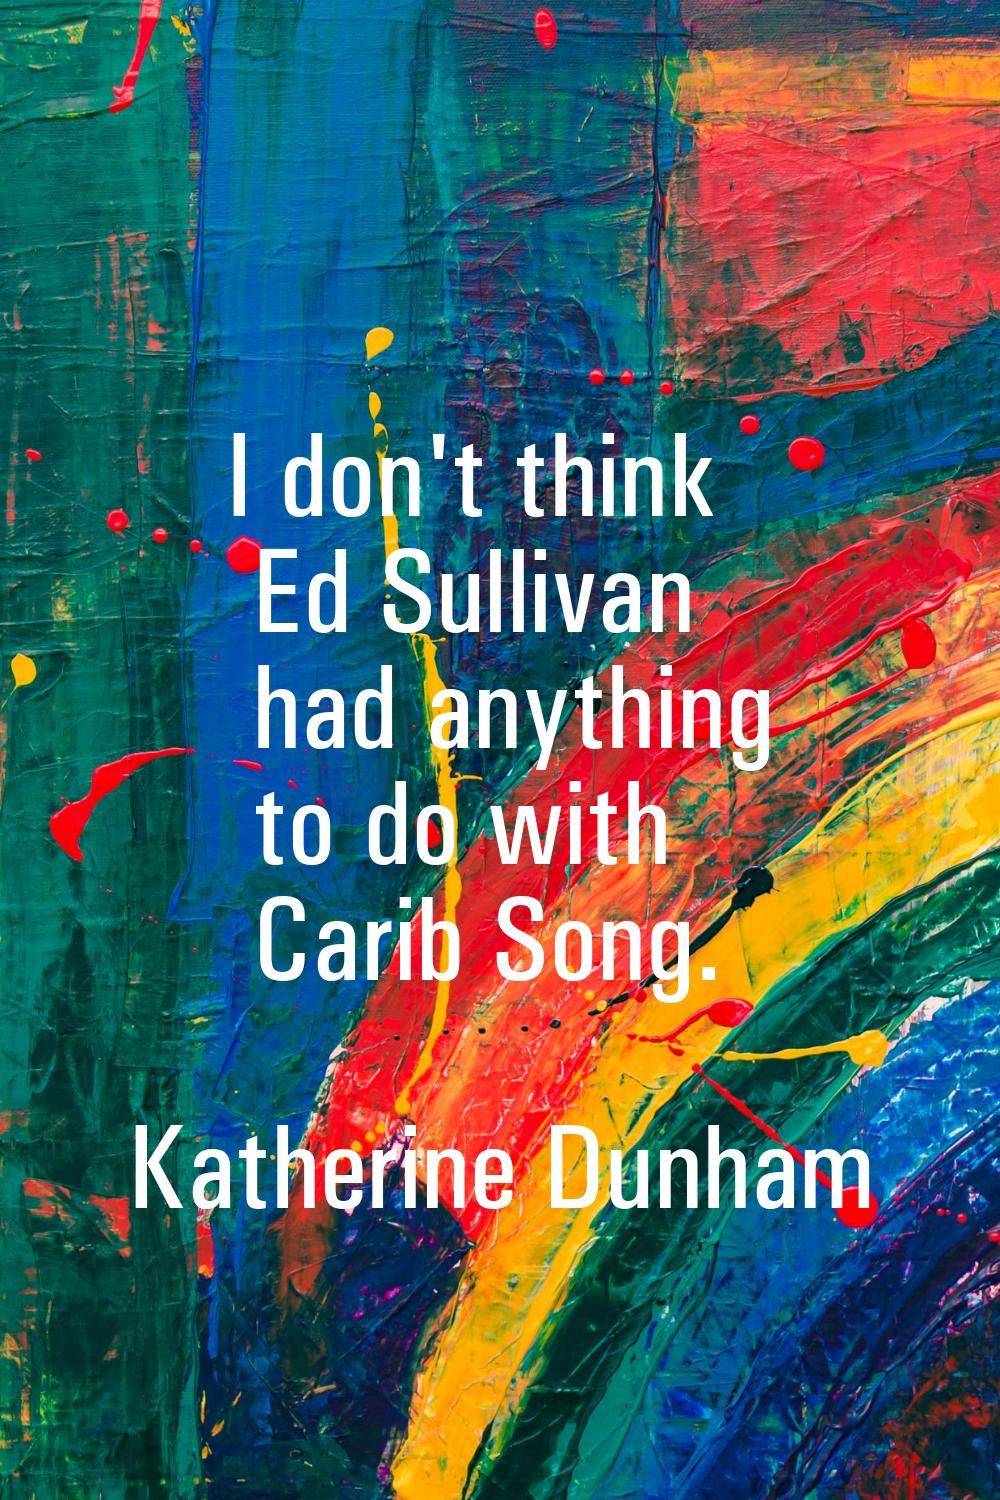 I don't think Ed Sullivan had anything to do with Carib Song.